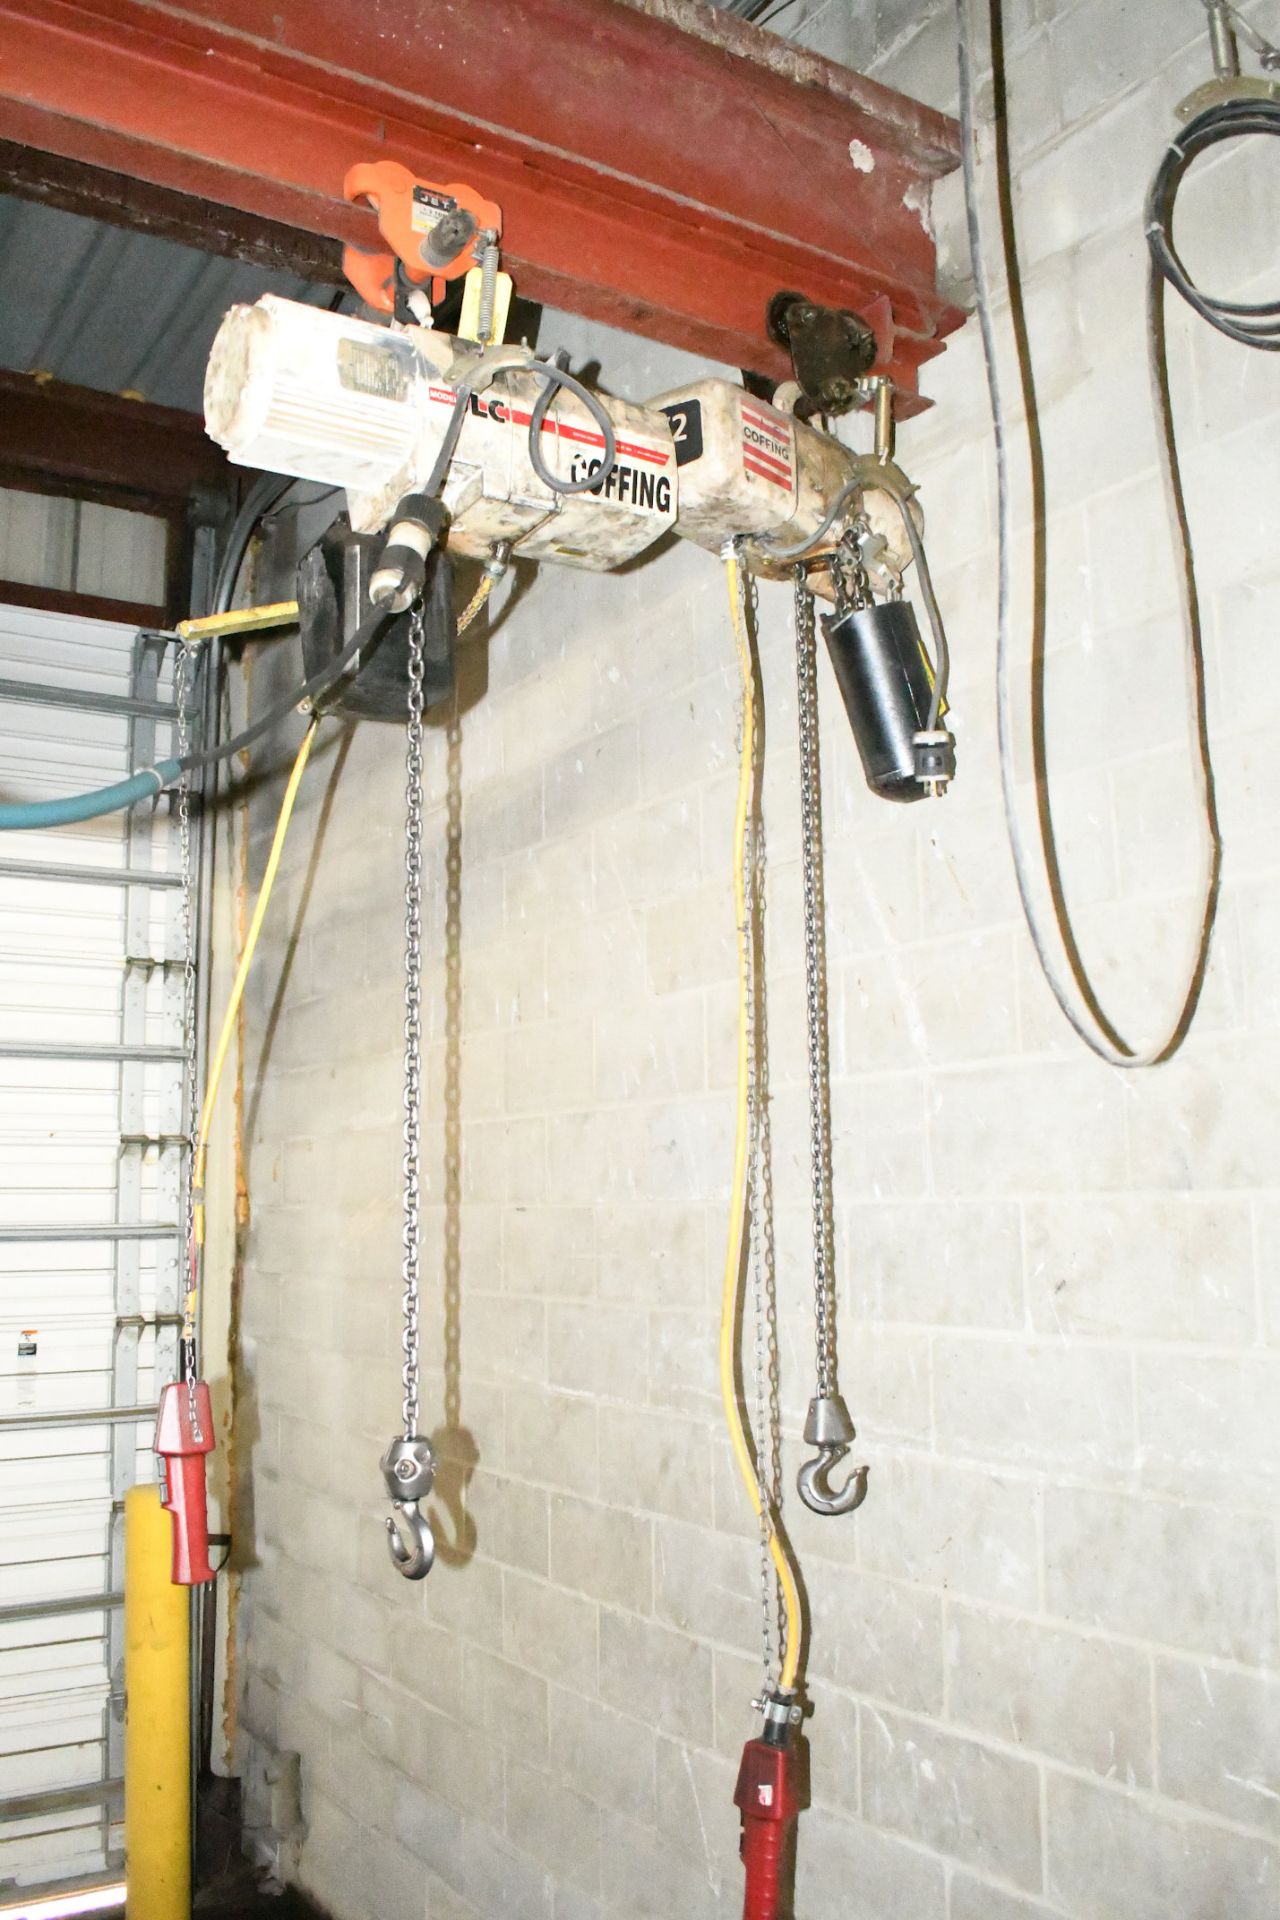 Lot-(2) Coffing 1/2-Ton Electric Hoists with Trollies, (Rail Not Included), (West Dock Area)